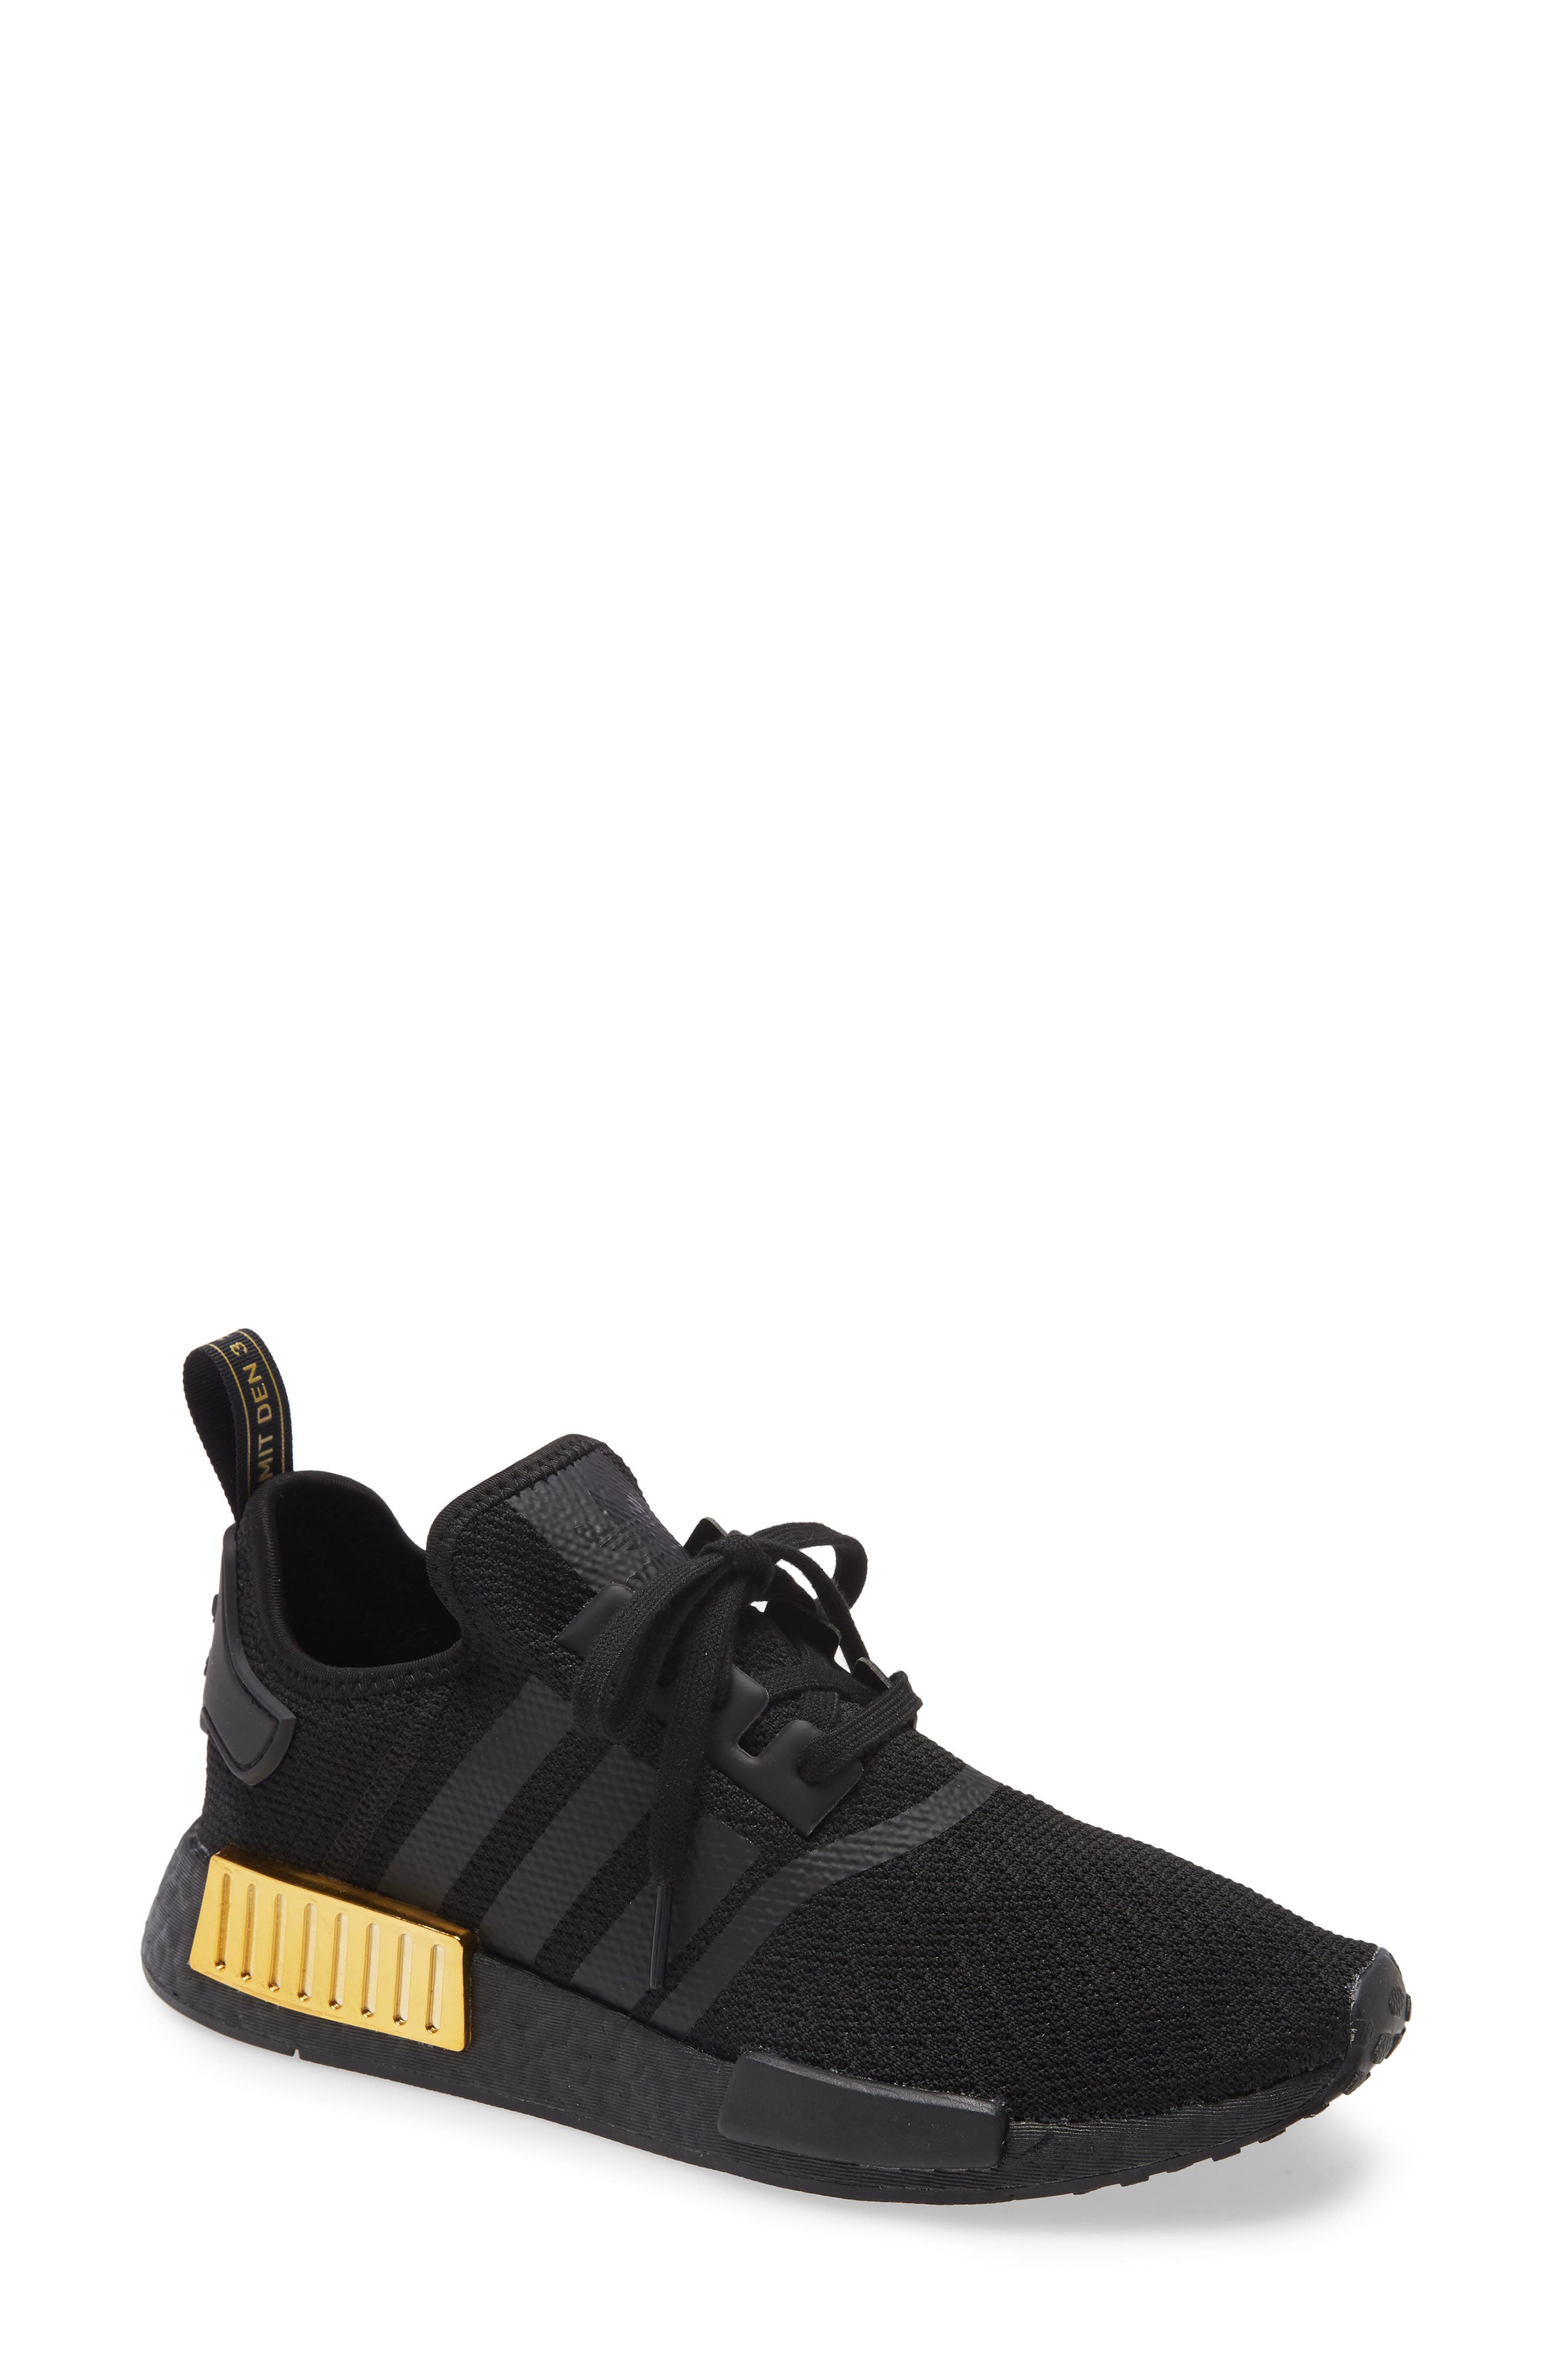 women's all black adidas shoes